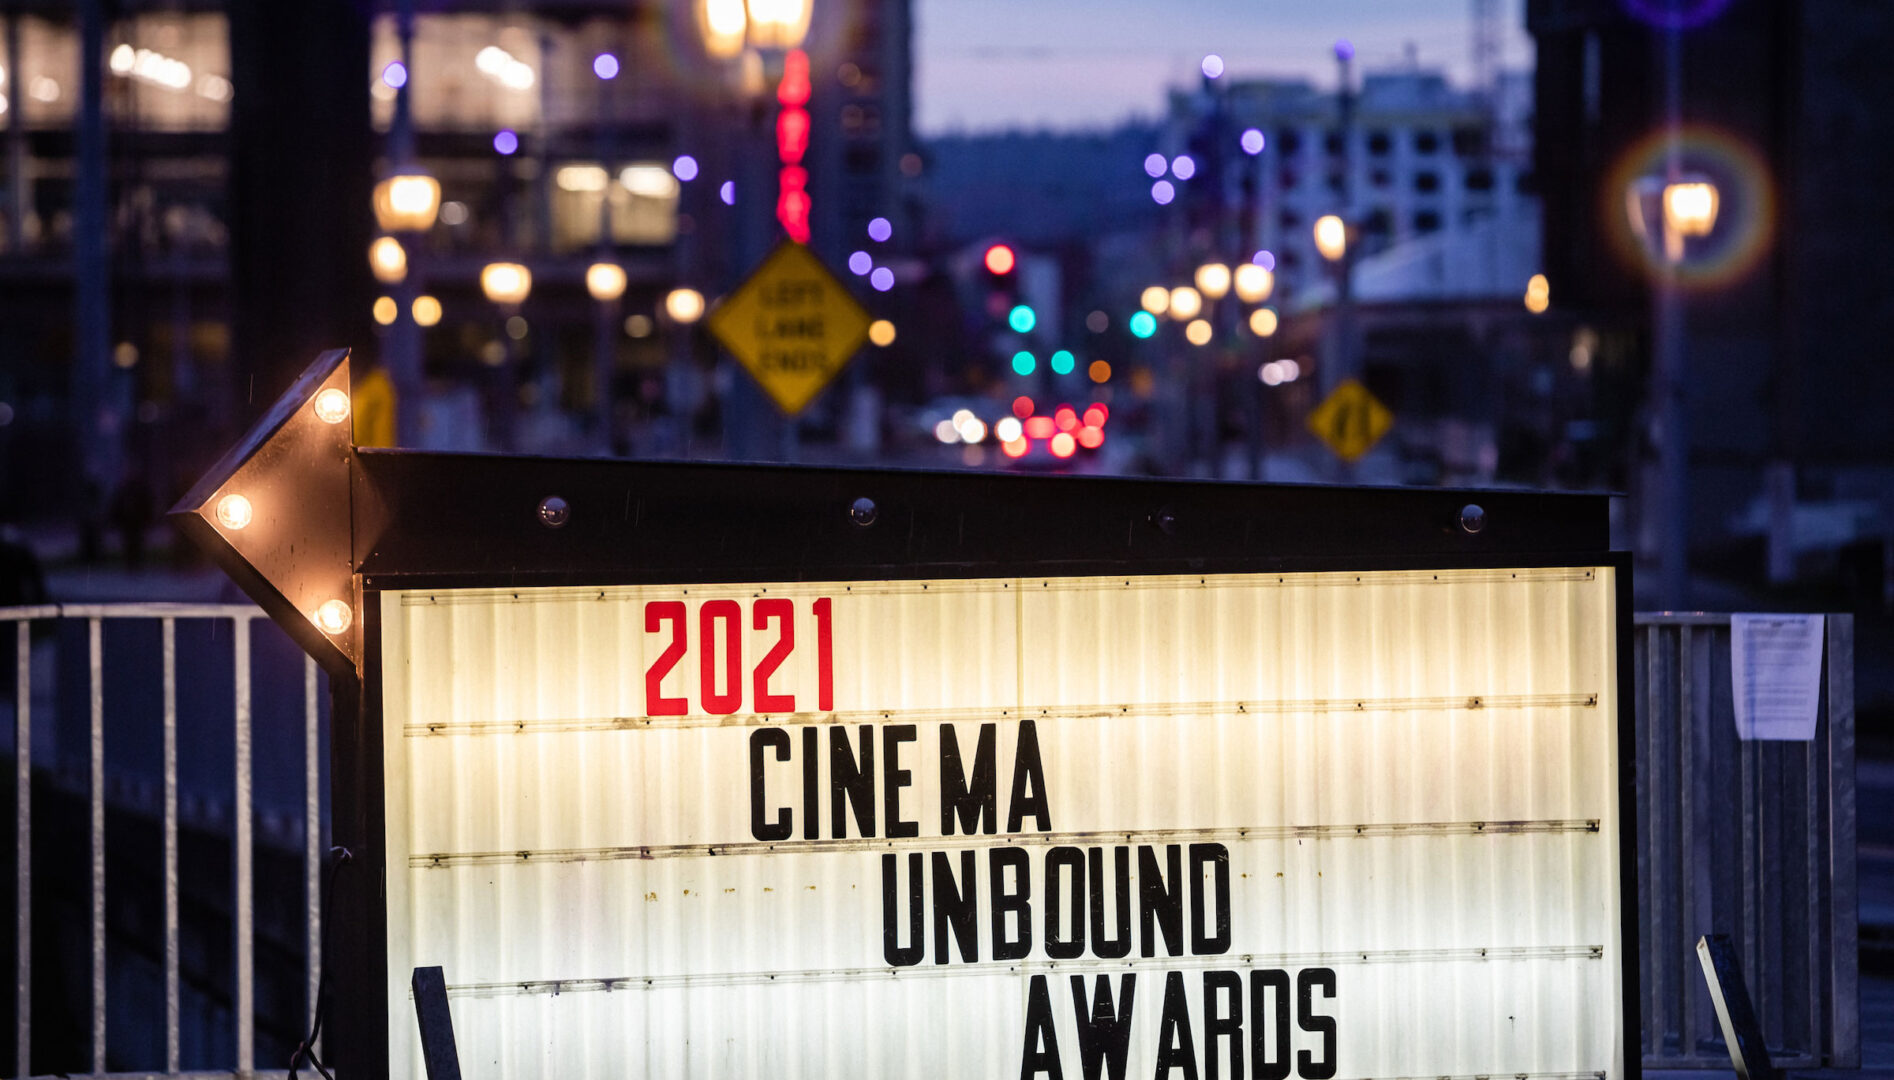 Lit up sign that says "2021 Cinema Unbound Awards" at dusk with cityscape and lights behind it